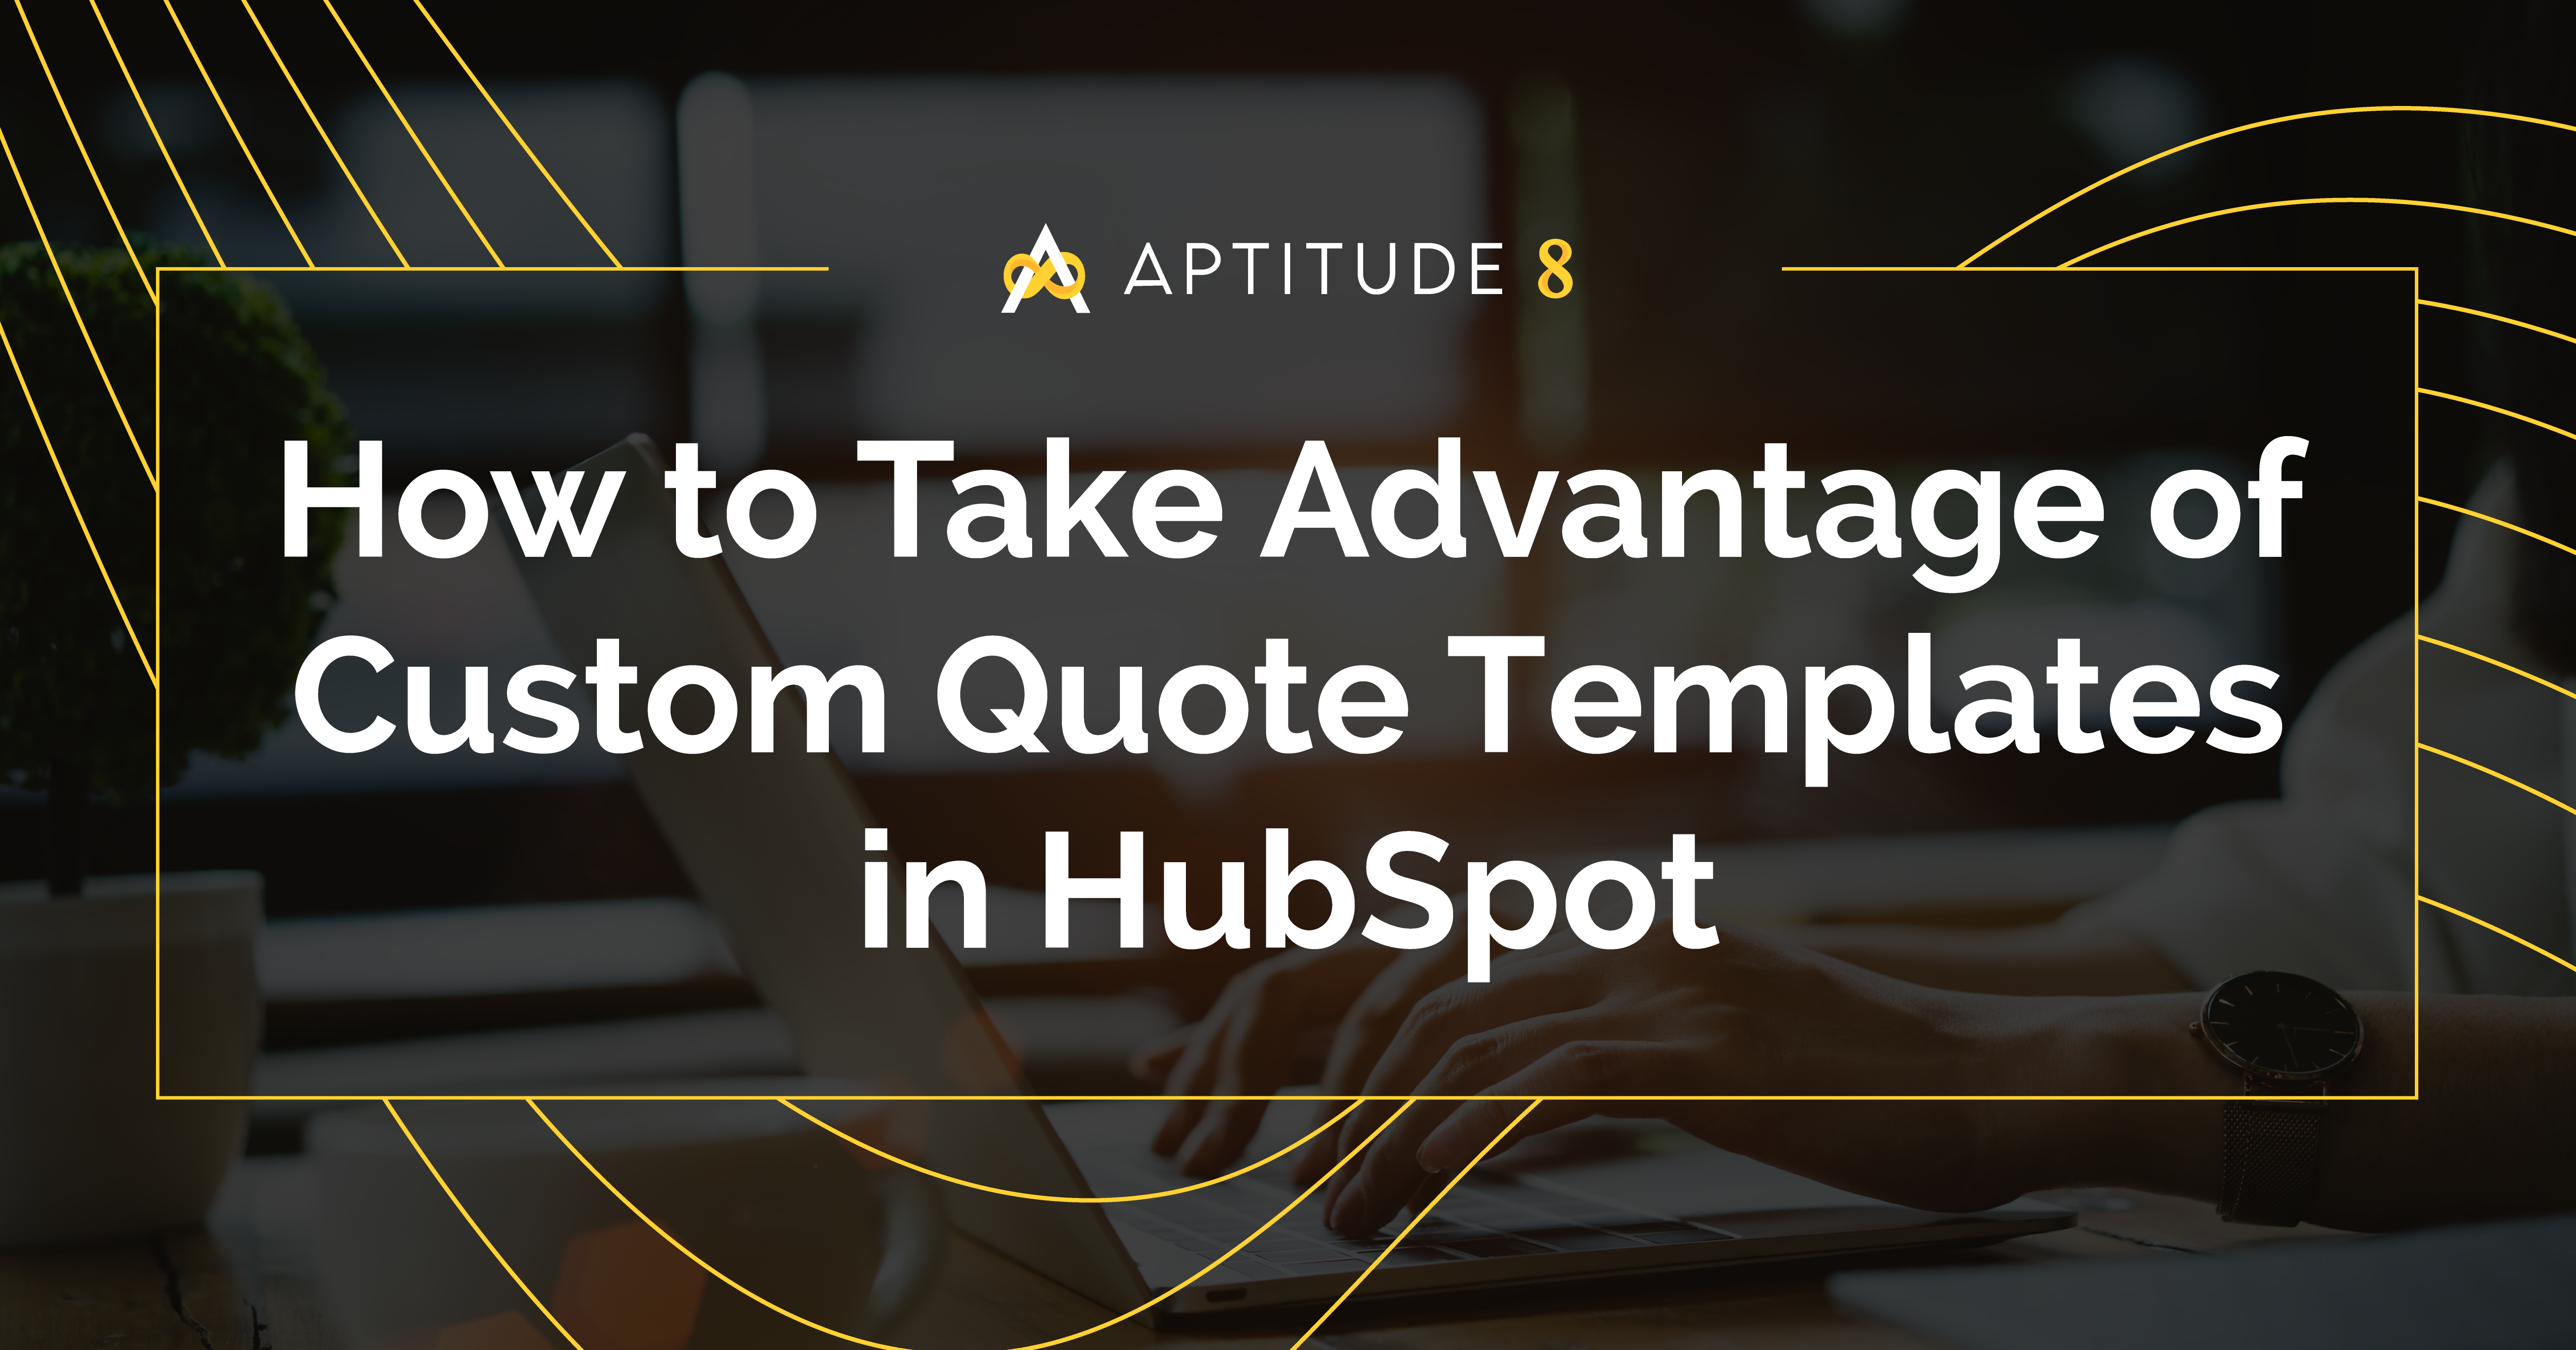 How to Take Advantage of Custom Quote Templates in HubSpot